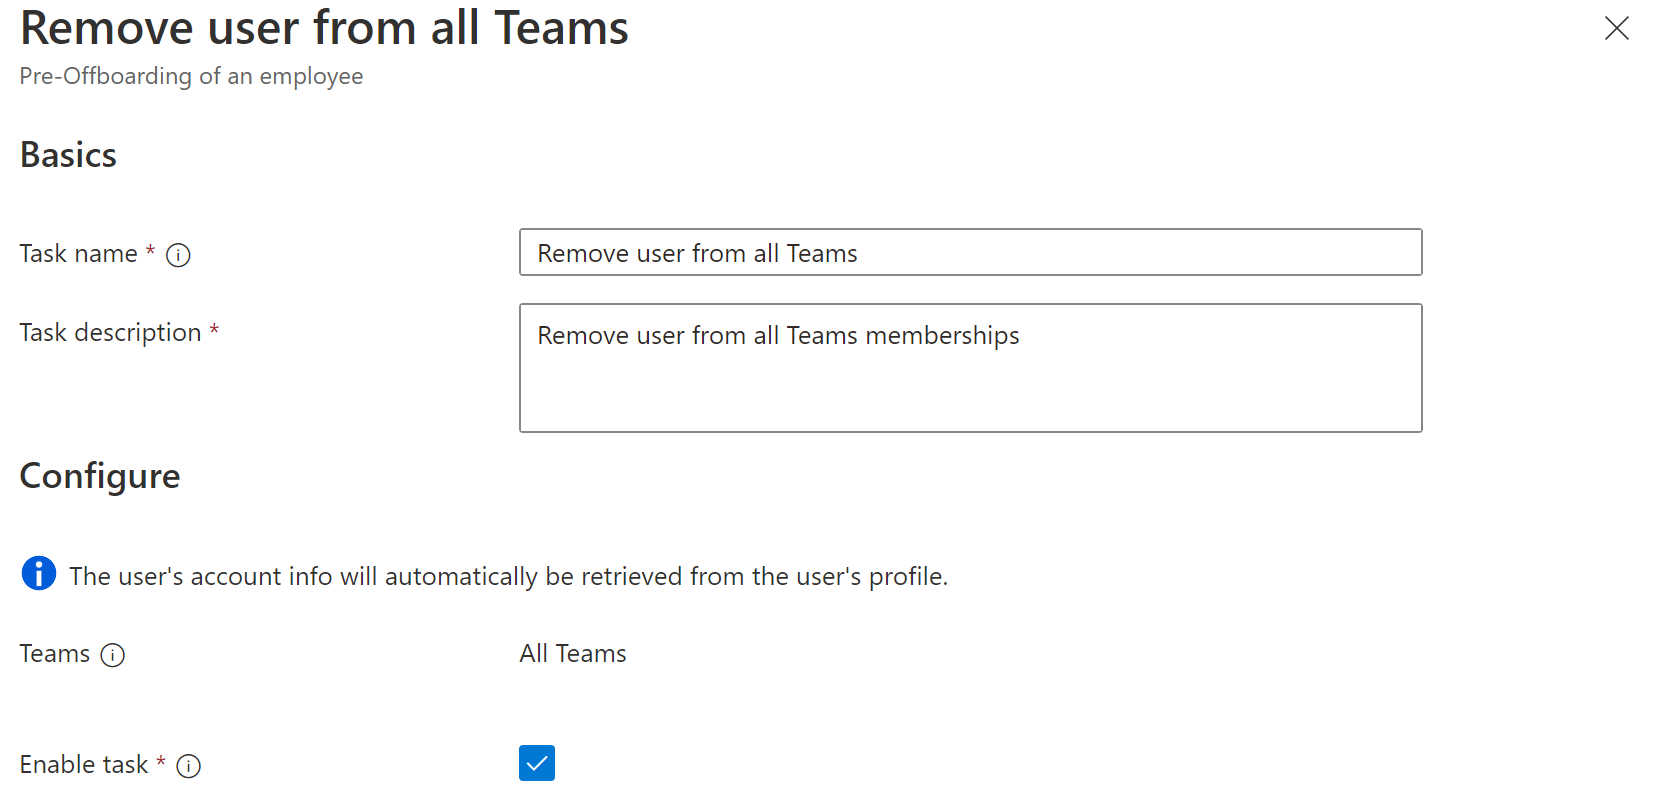 Screenshot of Workflows task: remove user from all teams.